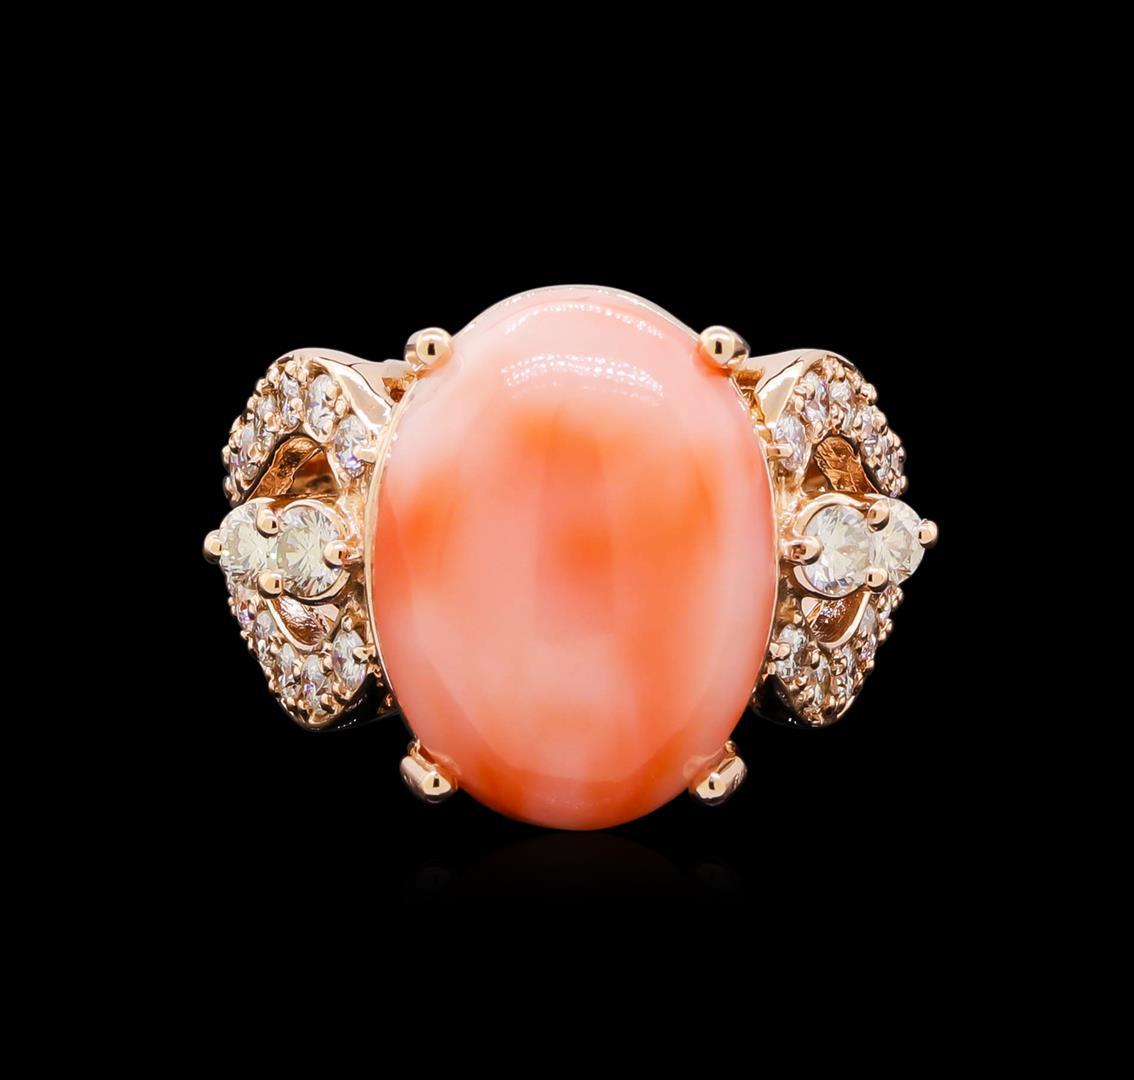 5.68 ctw Pink Coral and Diamond Ring - 14KT Rose Gold